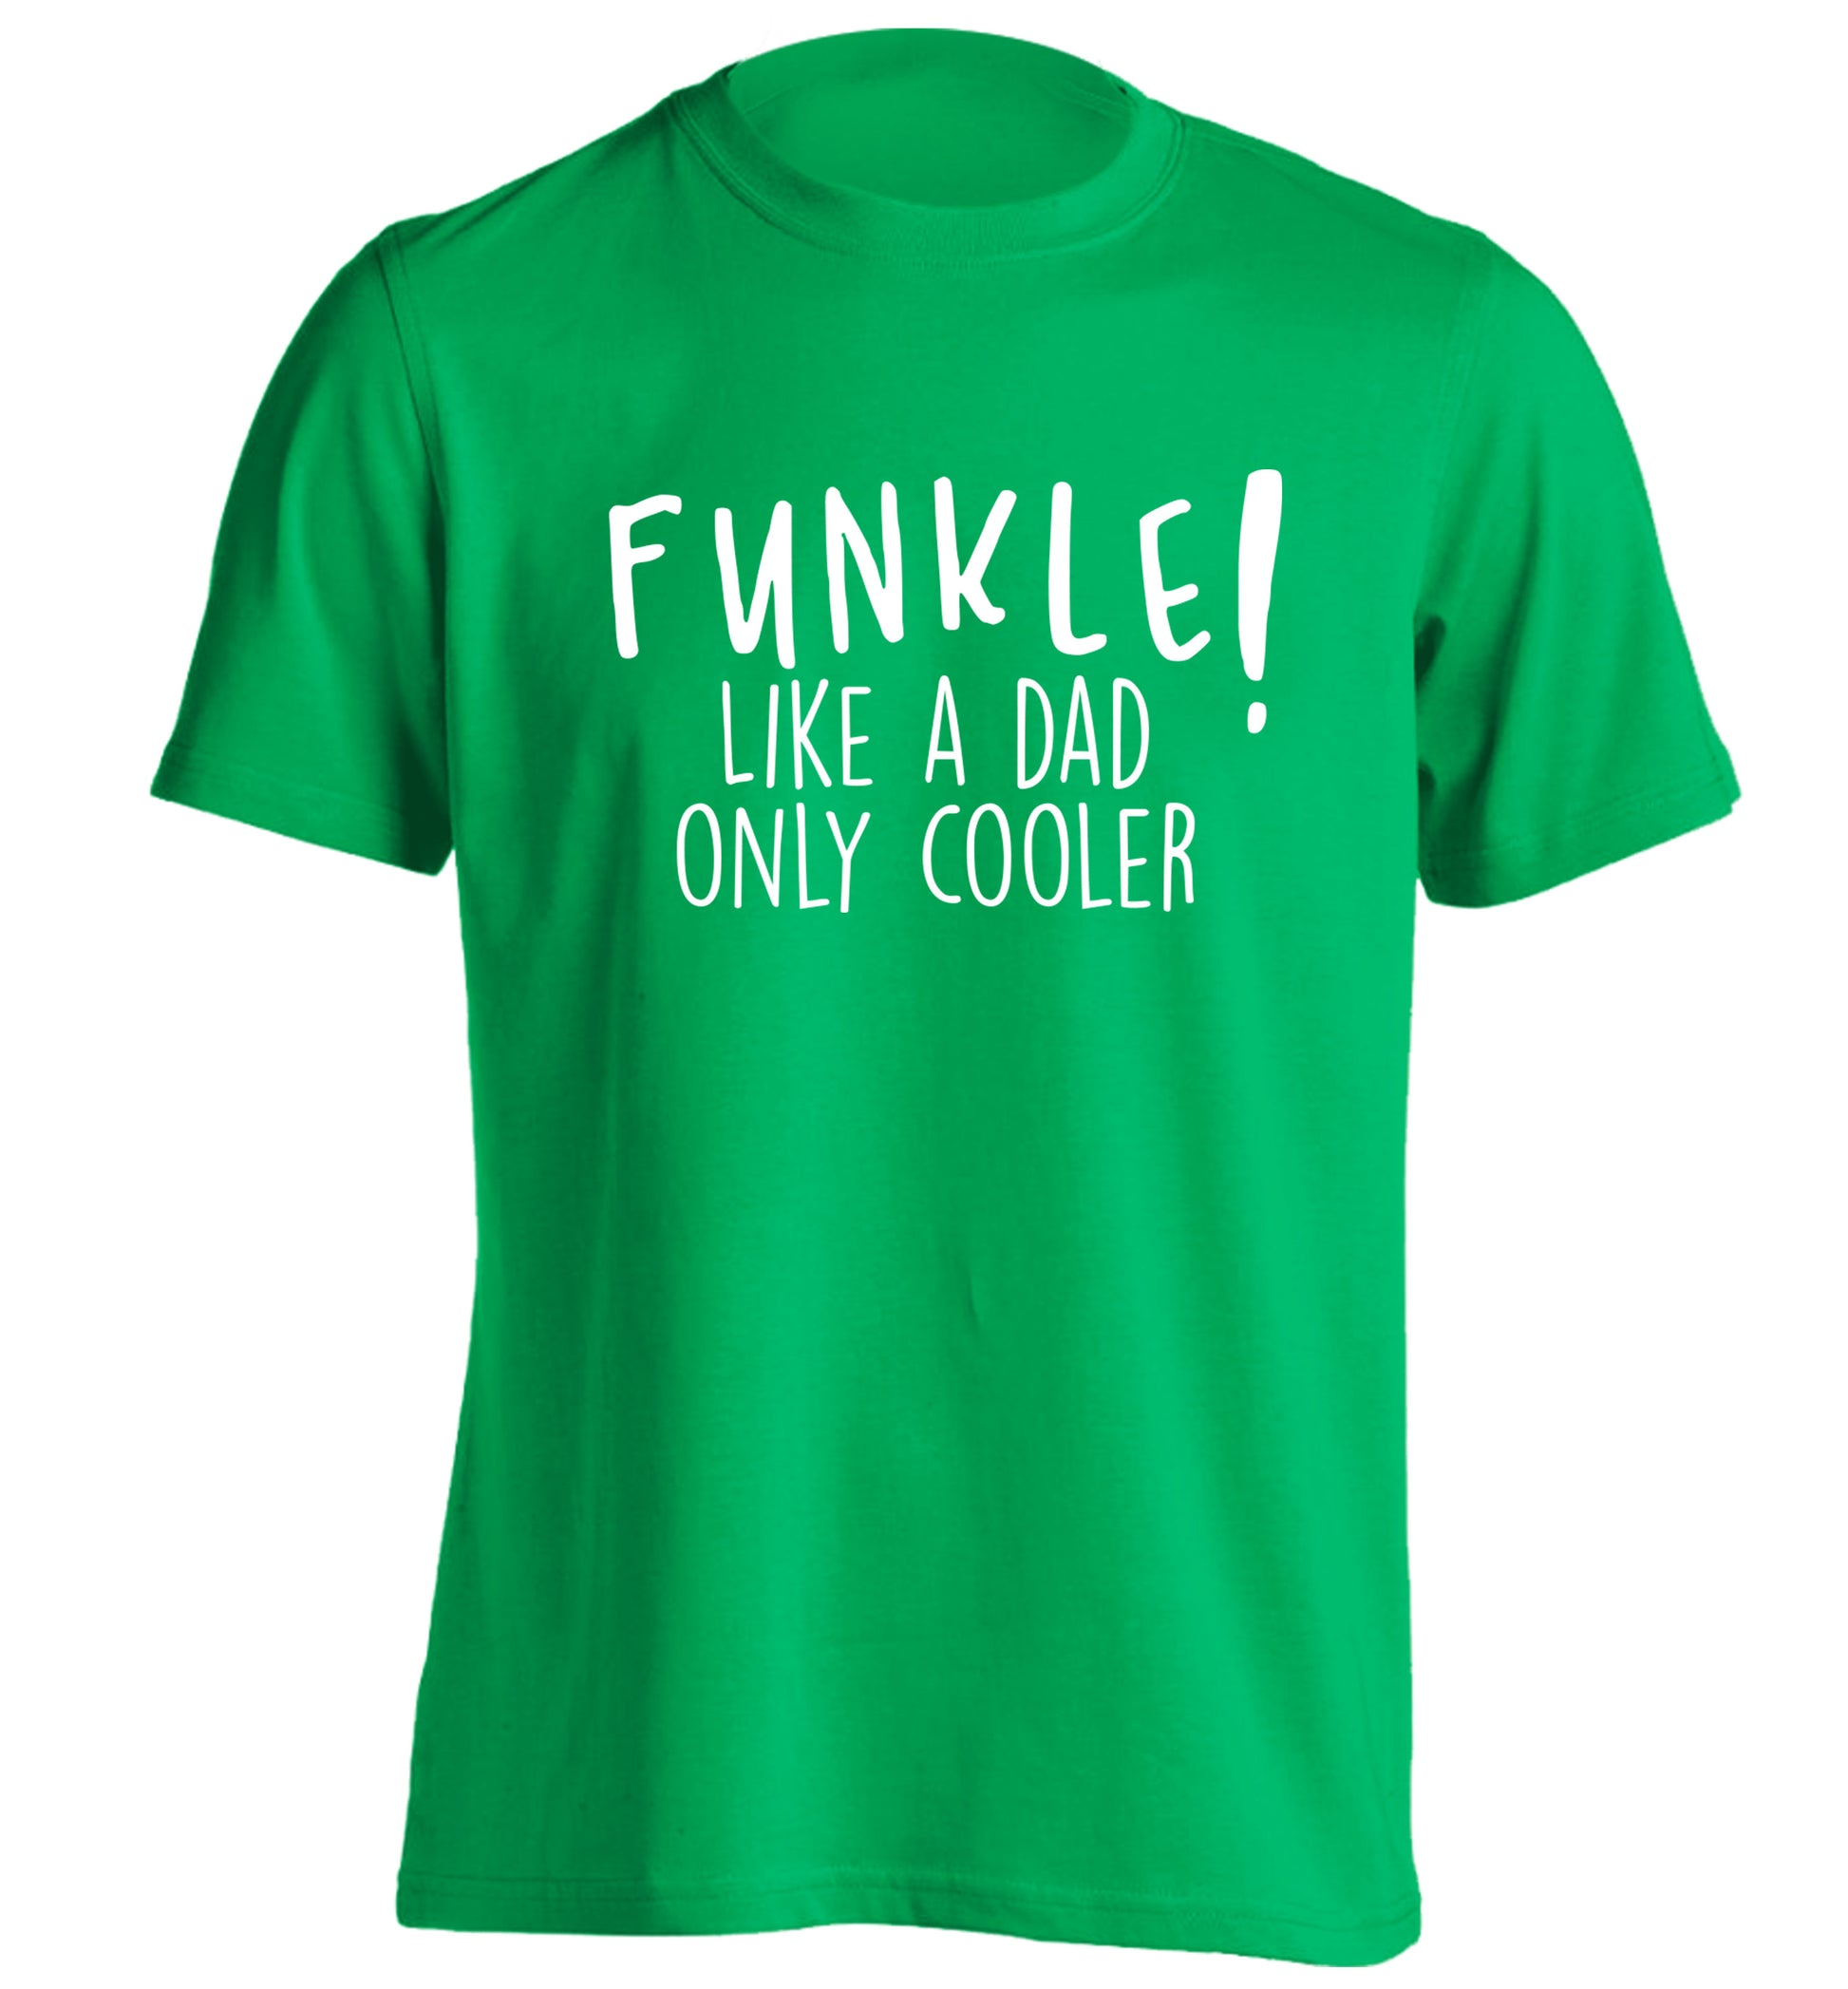 Funkle Like a Dad Only Cooler adults unisex green Tshirt 2XL